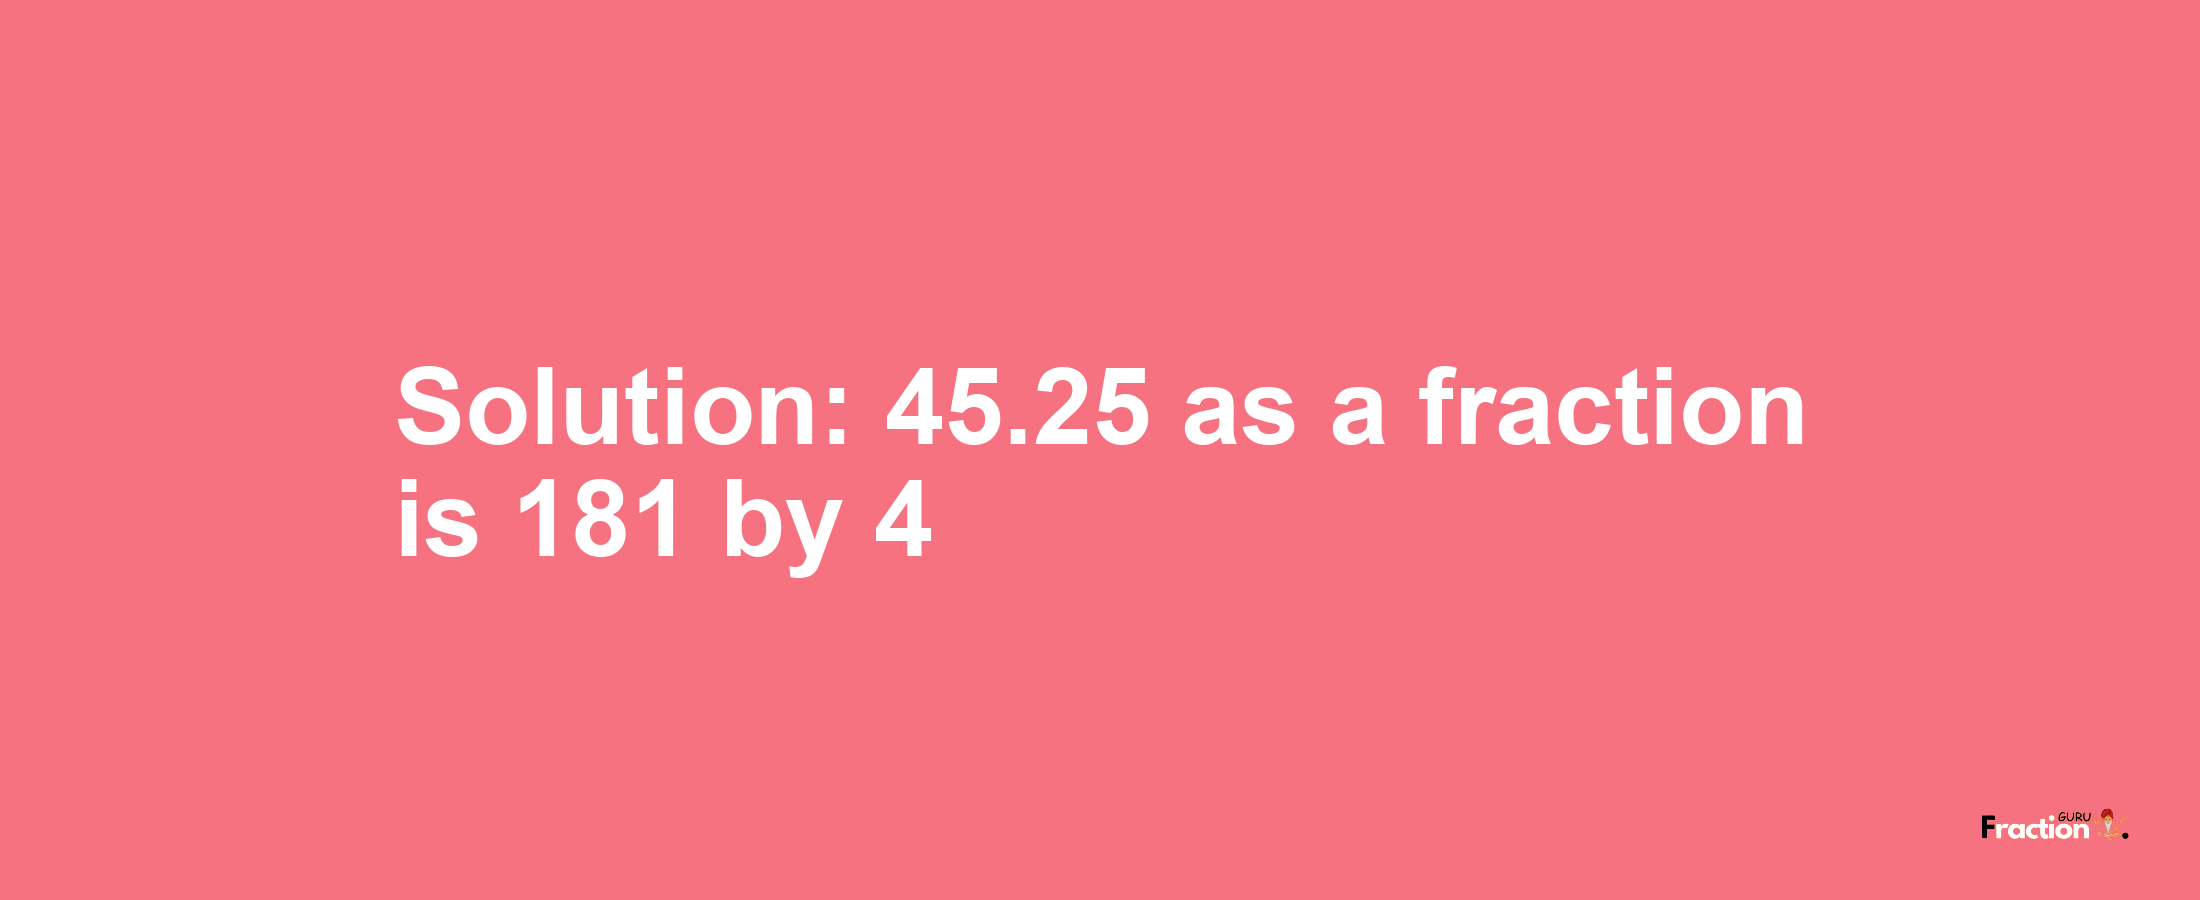 Solution:45.25 as a fraction is 181/4